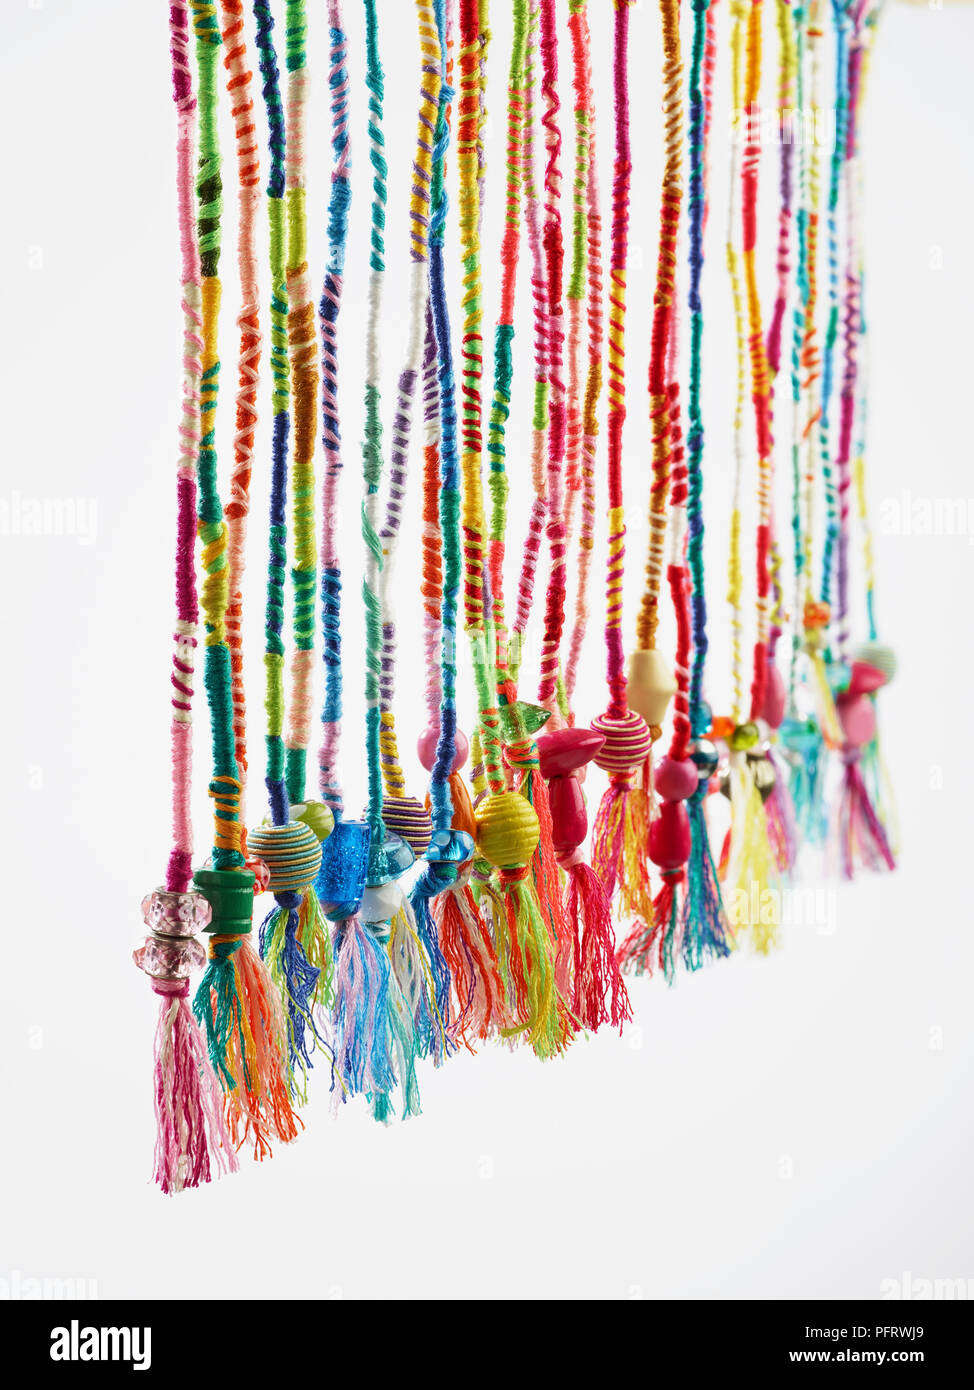 Collection of hair wraps Stock Photo